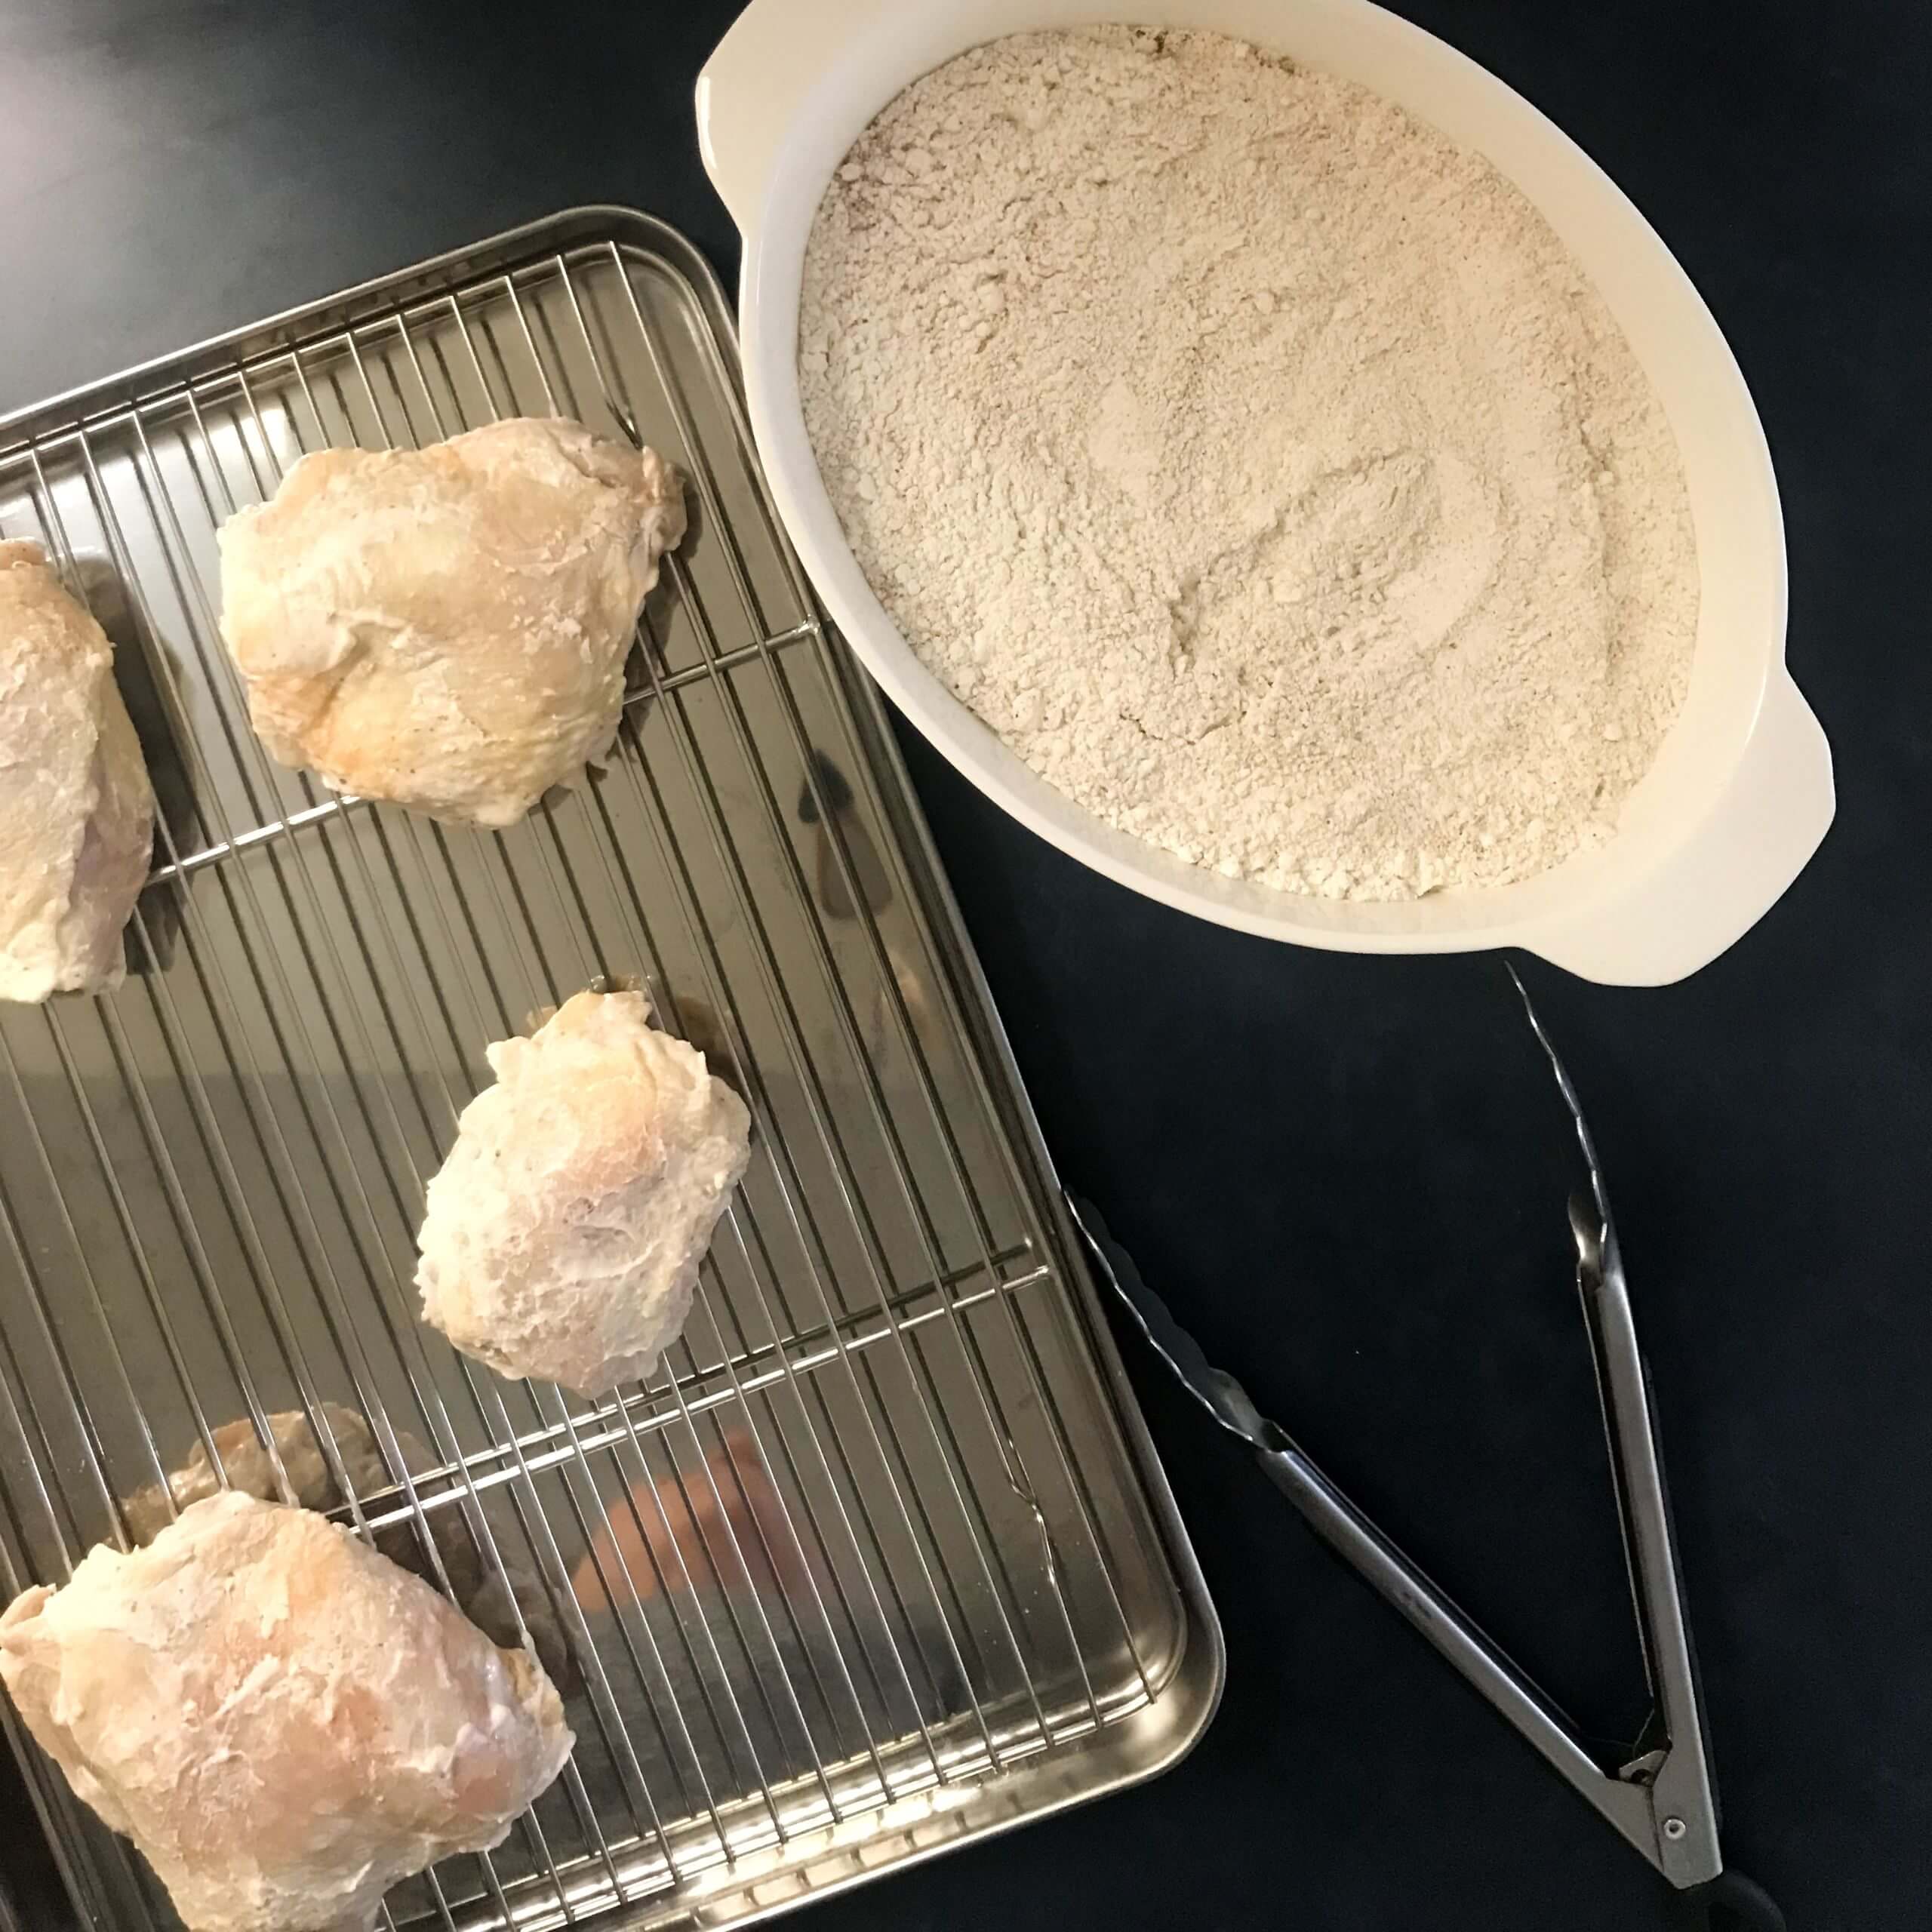 chicken to be added on flour